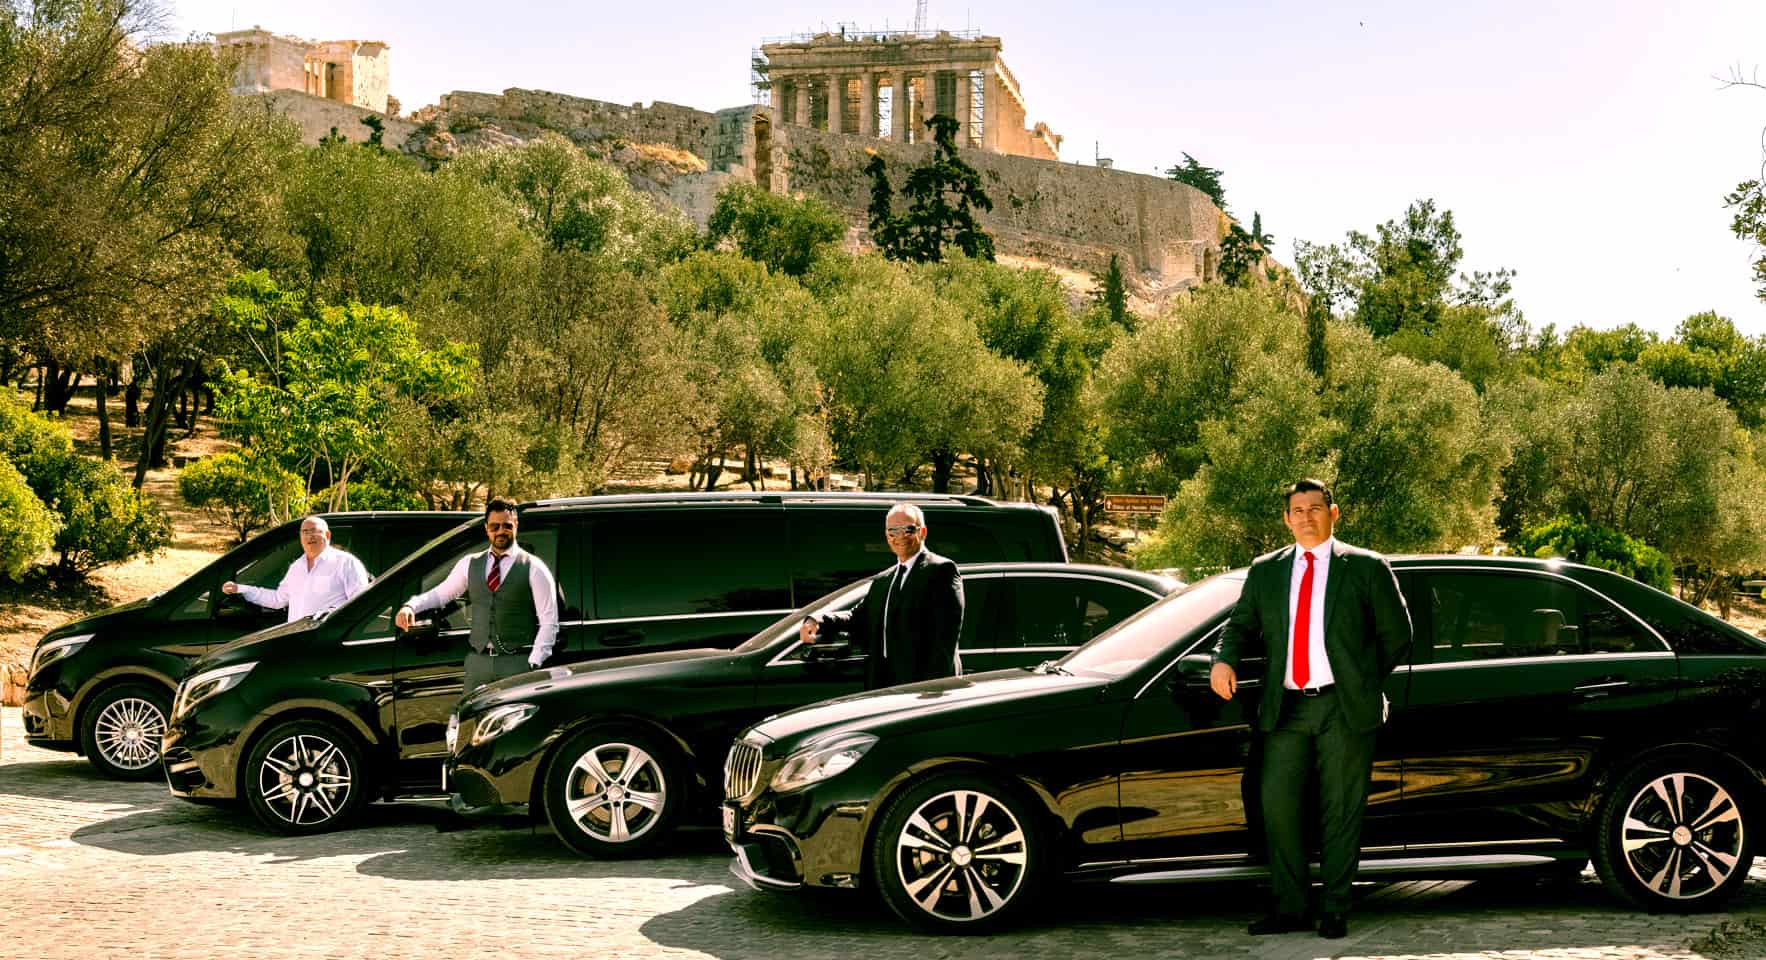 LUXURY MERCEDES VEHICLES & EXPERIENCED DRIVERS AND GUIDES